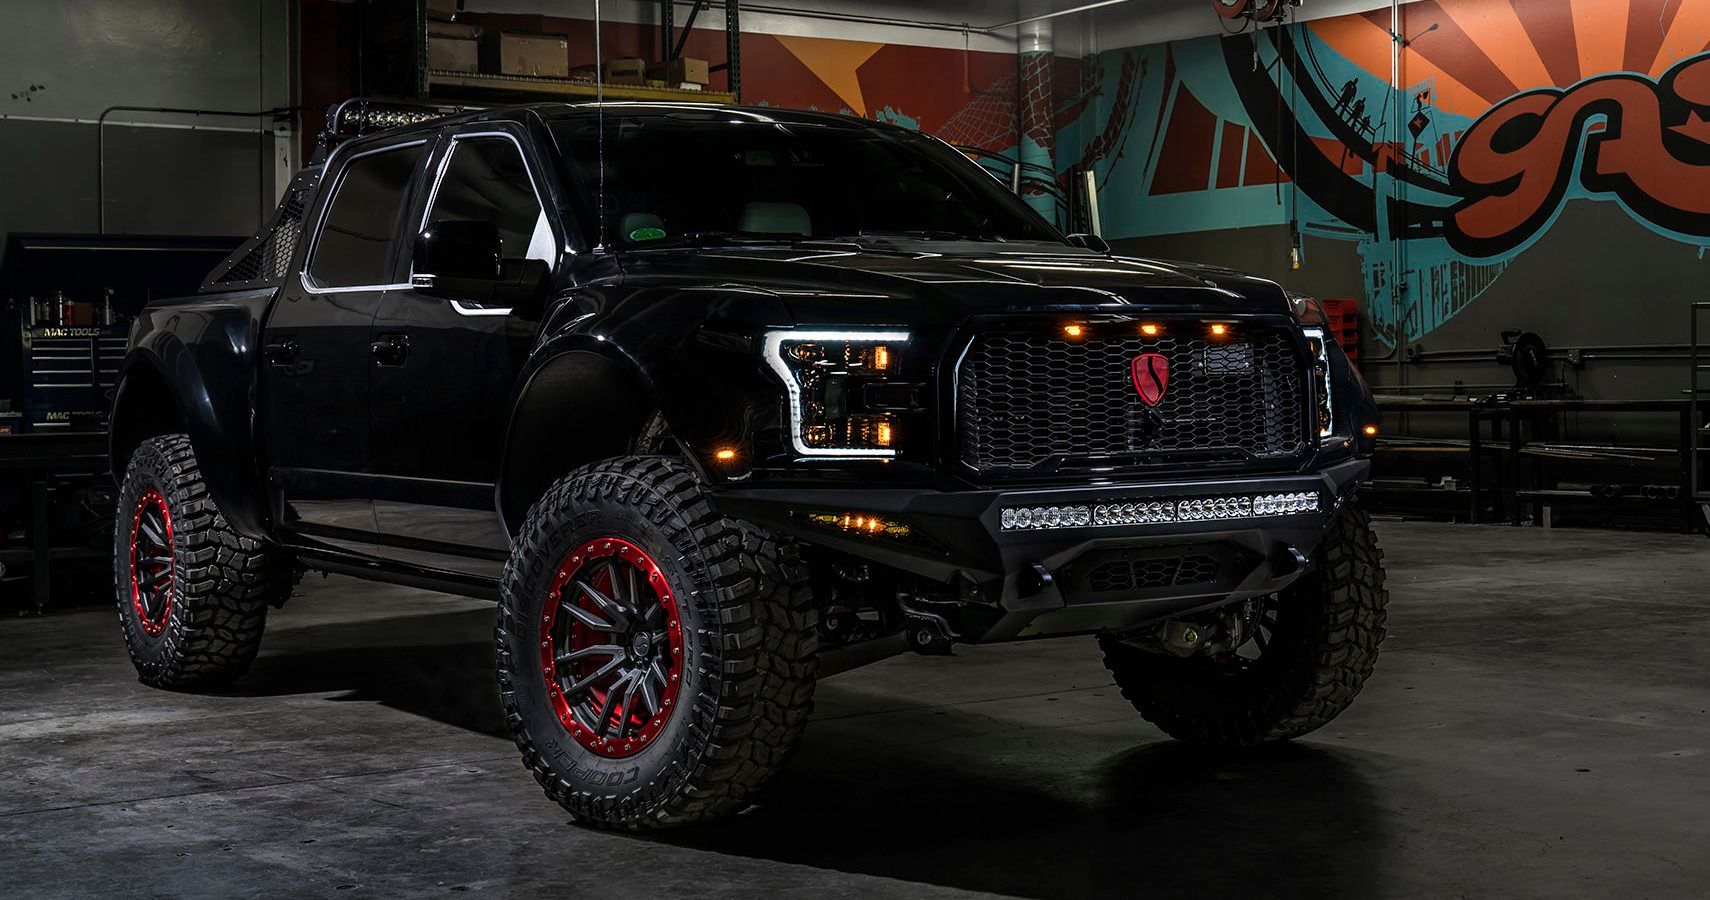 This Ford Raptor Build Completely Revamps The Truck